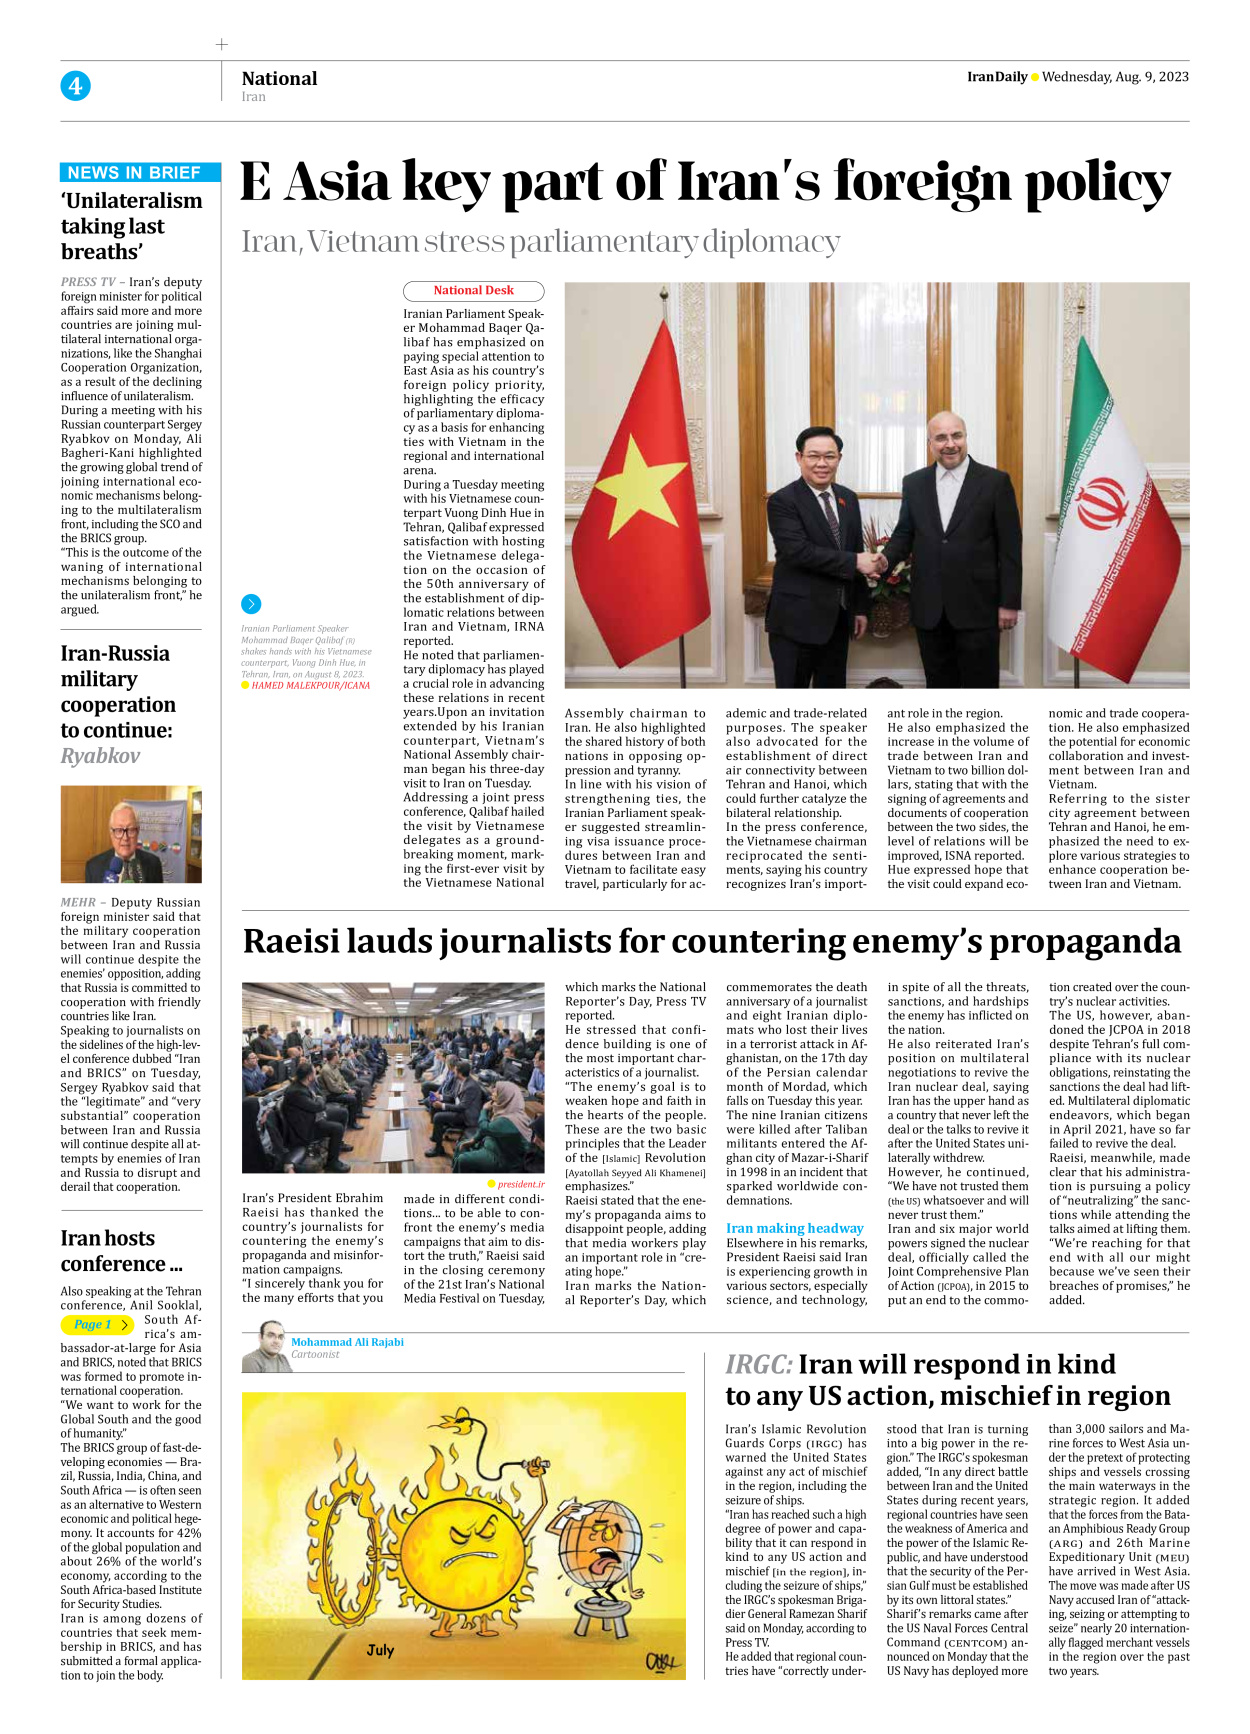 Iran Daily - Number Seven Thousand Three Hundred and Fifty Eight - 09 August 2023 - Page 4